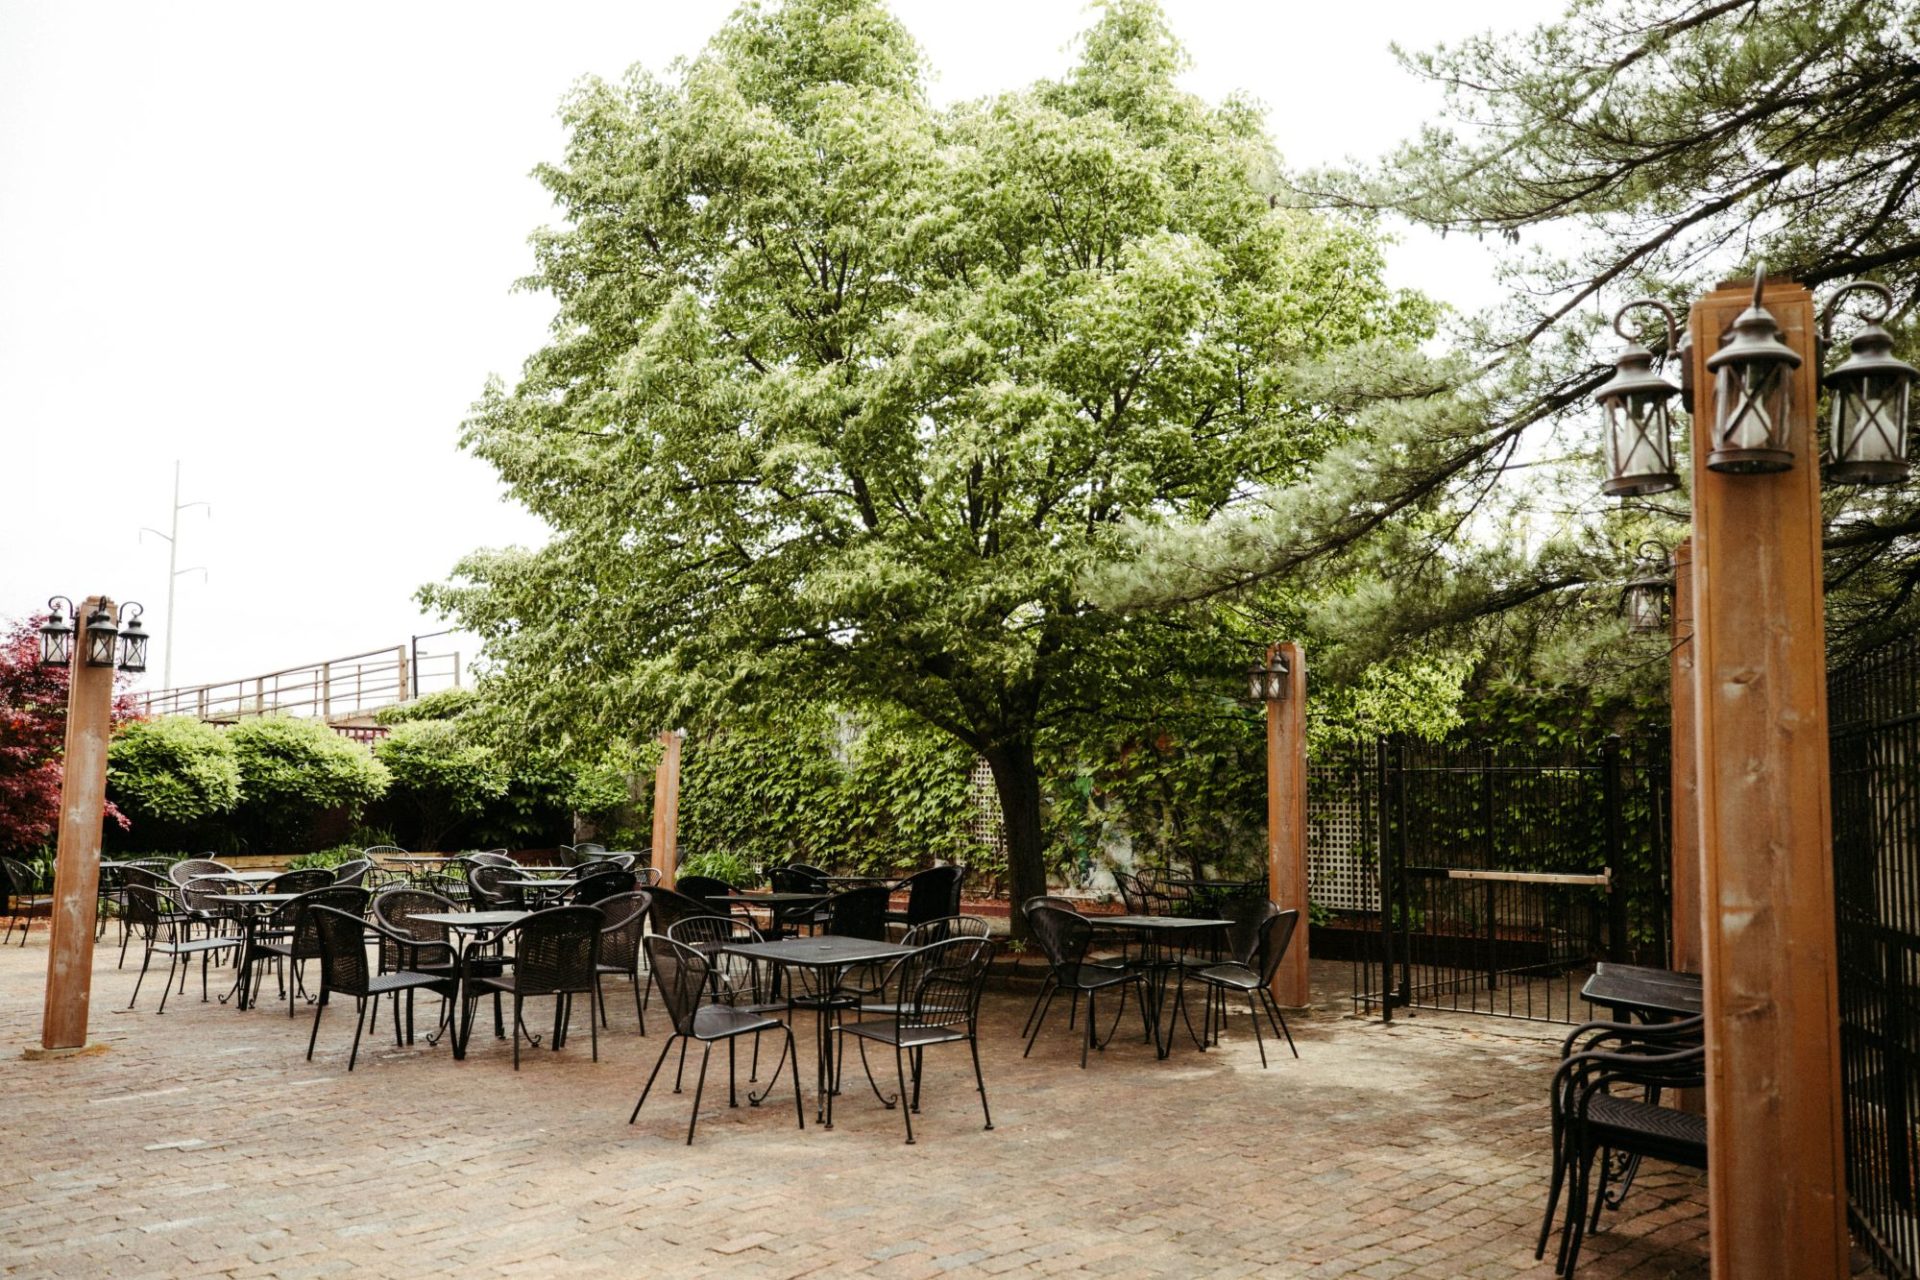 A large outdoor patio with several black metal tables and chairs. There is a large tree in the center of the patio.